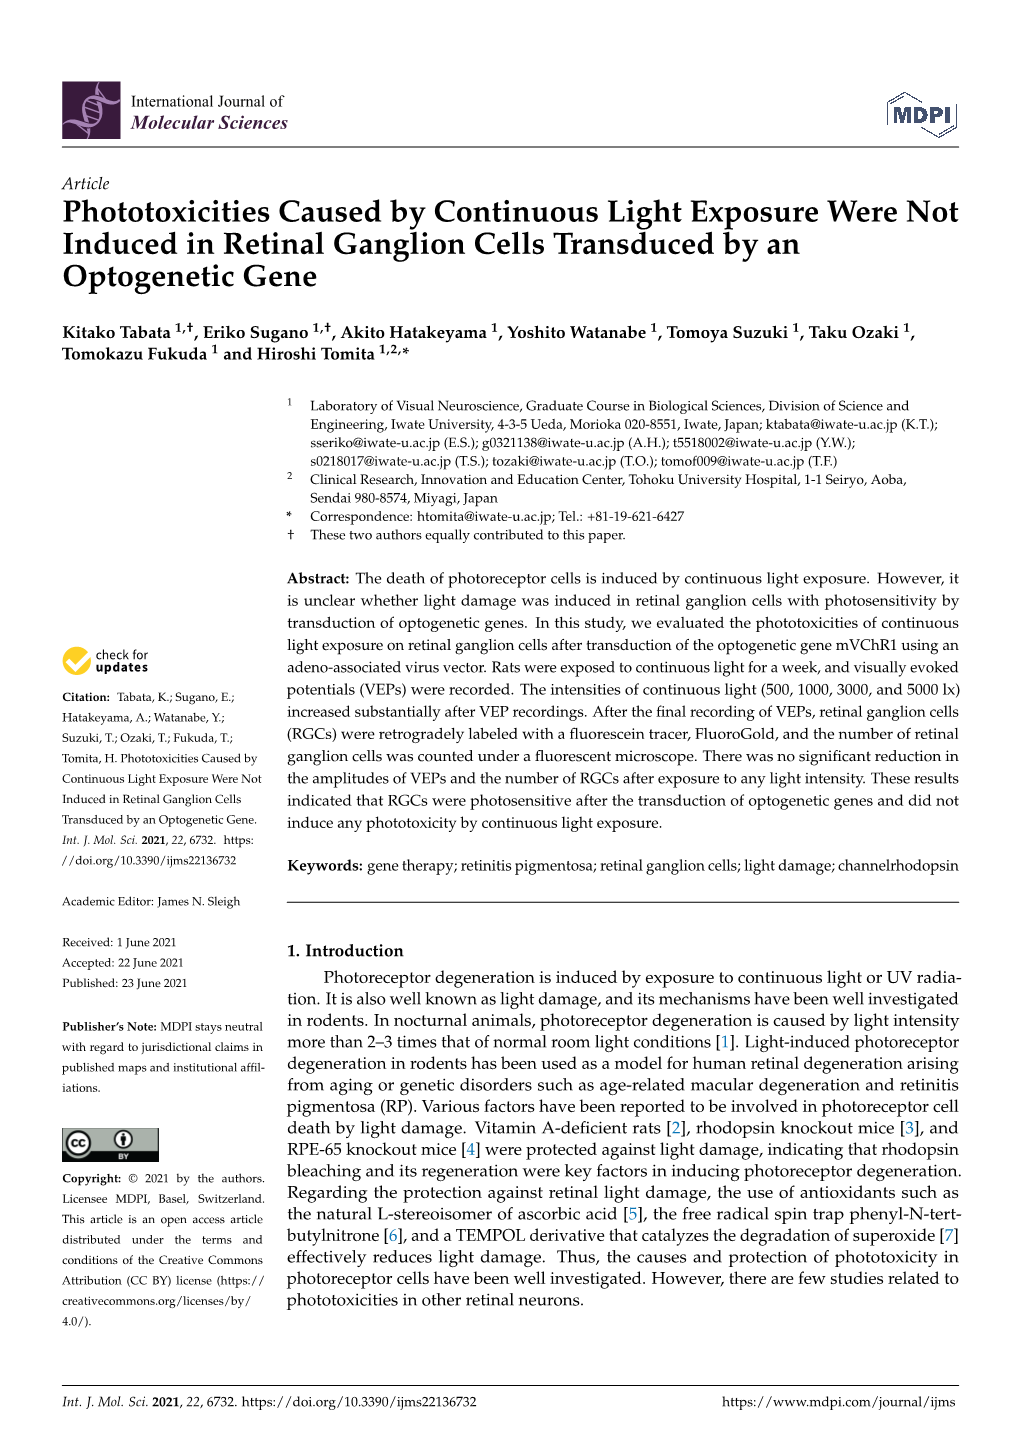 Phototoxicities Caused by Continuous Light Exposure Were Not Induced in Retinal Ganglion Cells Transduced by an Optogenetic Gene